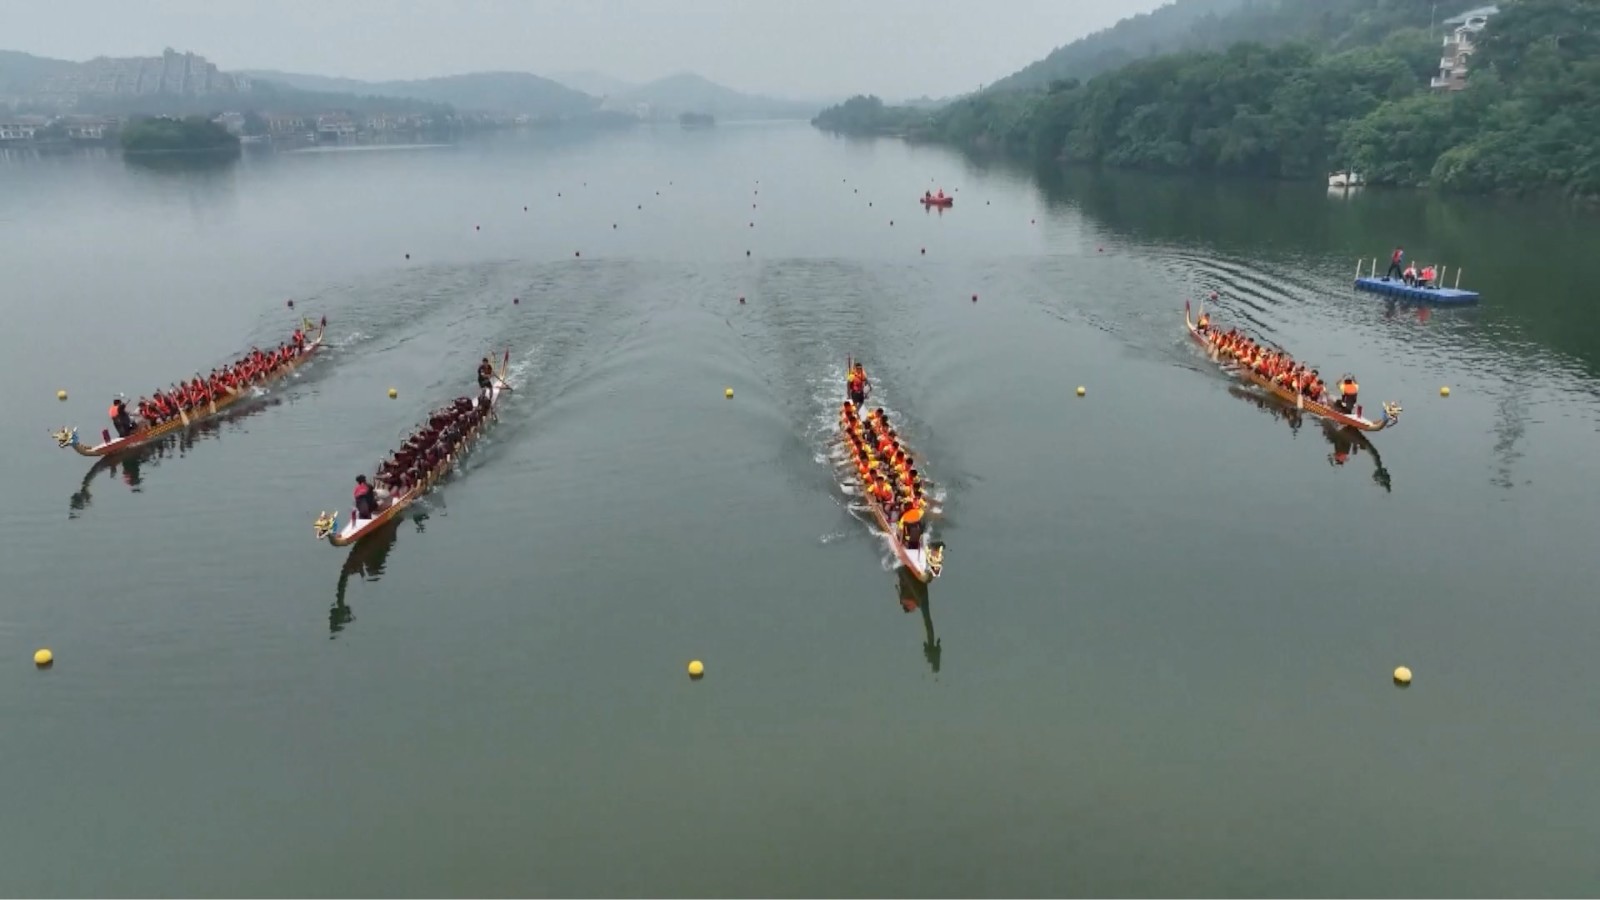 Cultural activities held across China ahead of Dragon Boat Festival